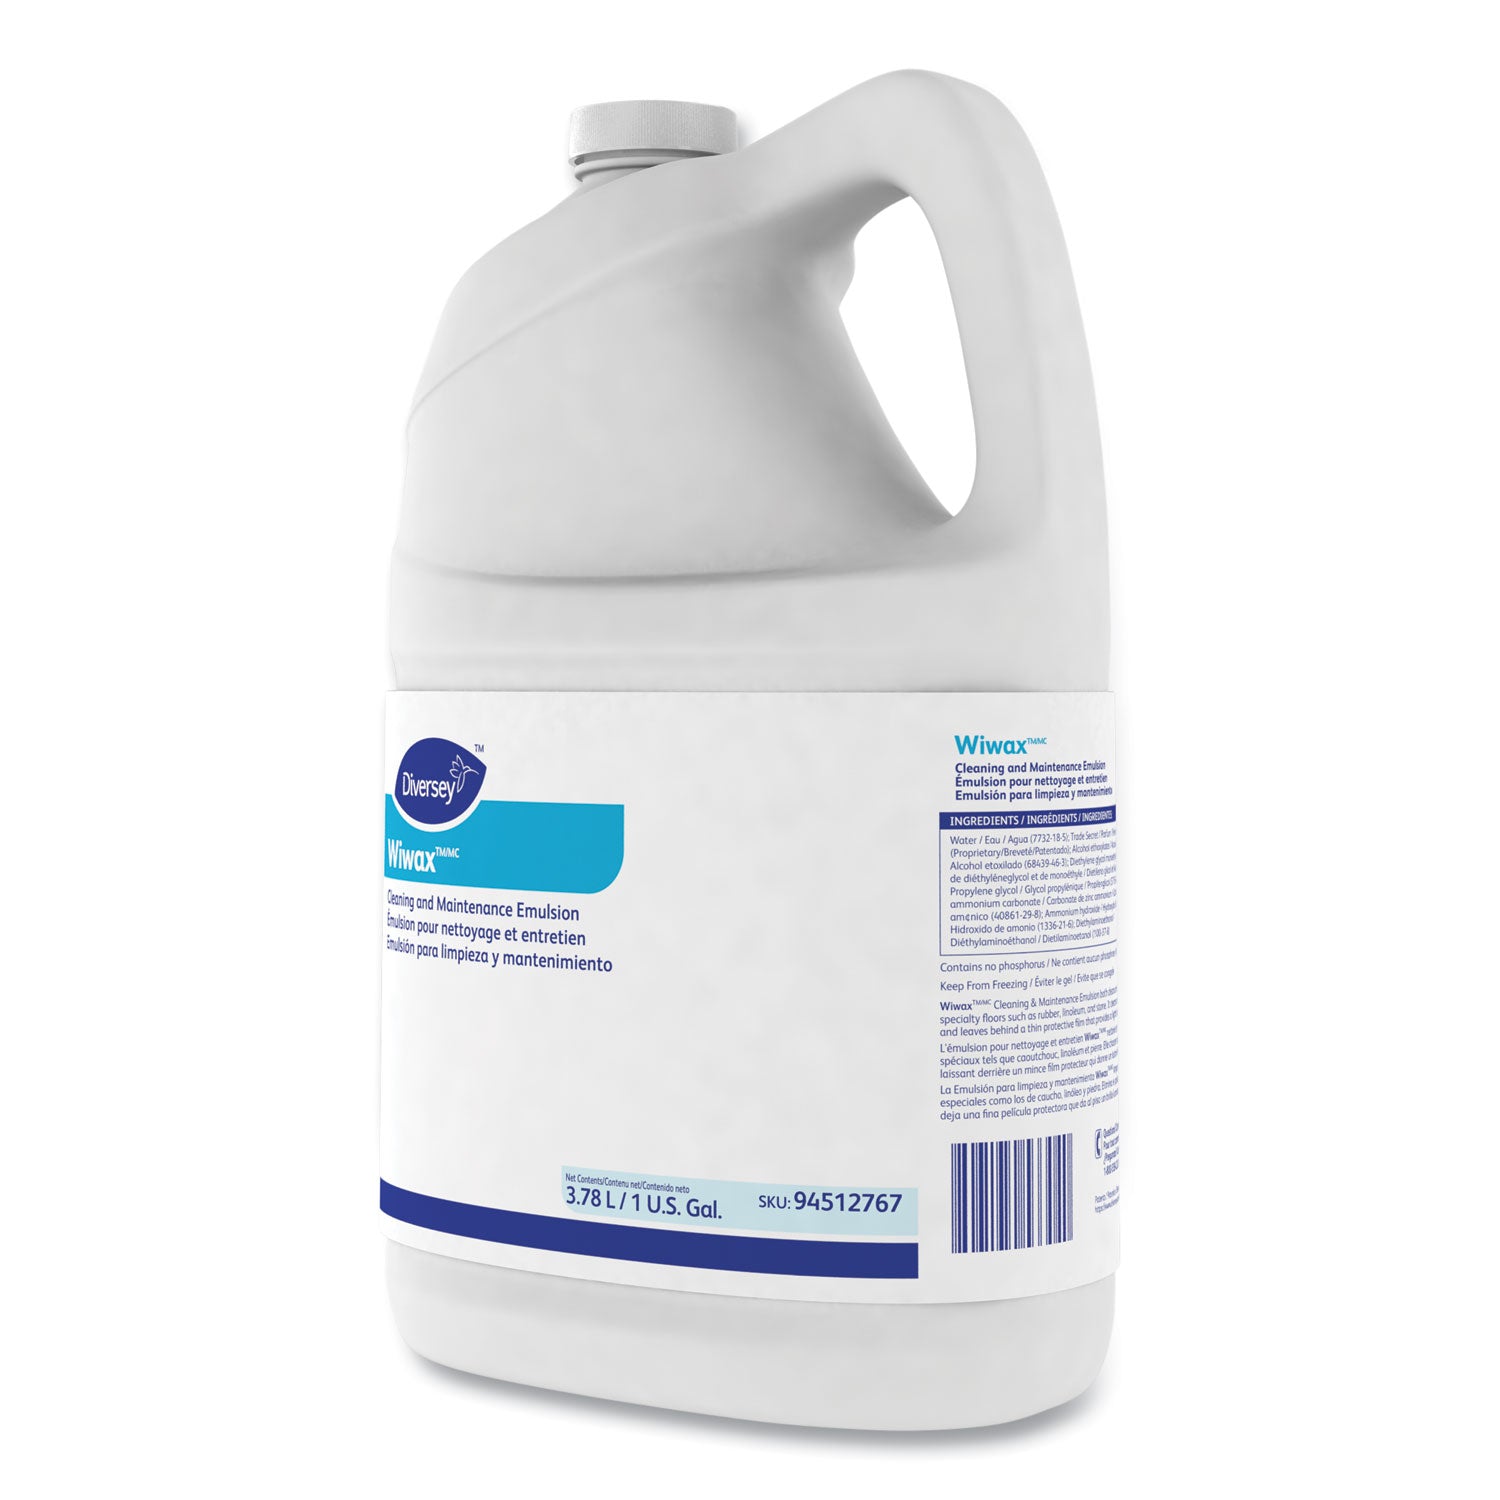 wiwax-cleaning-and-maintenance-solution-liquid-1-gal-bottle-4-carton_dvo94512767 - 5